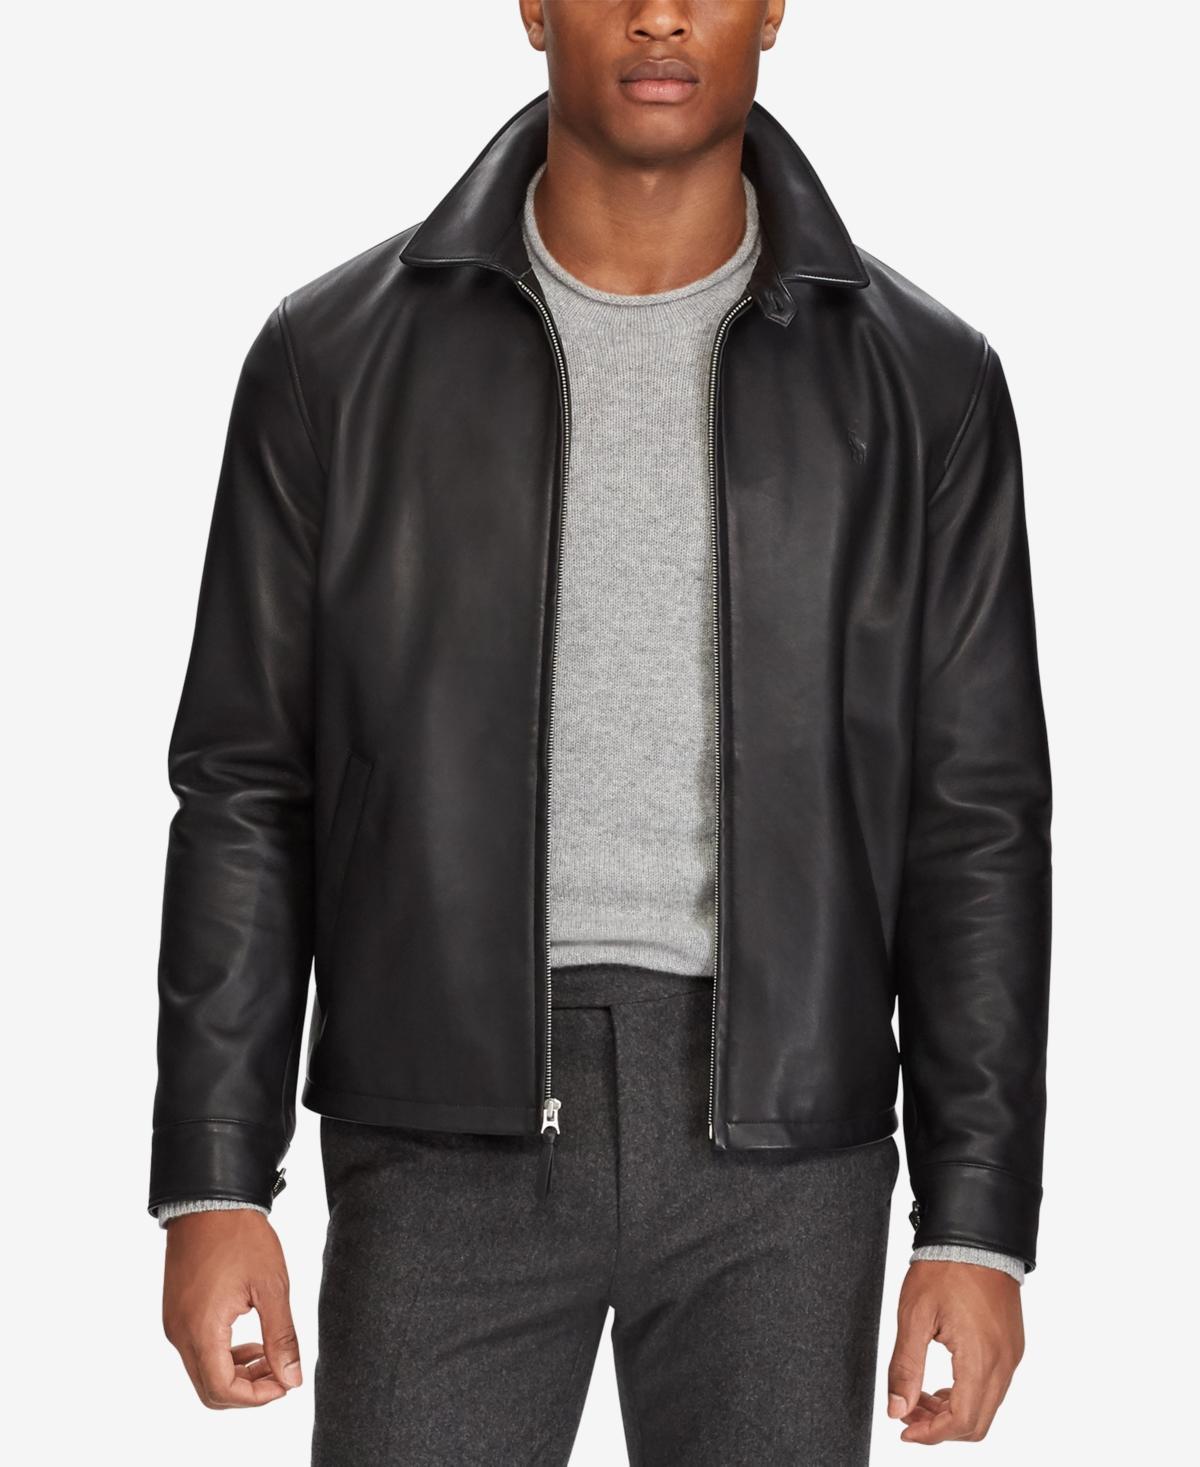 Polo Ralph Lauren Mens Leather Jacket Product Image